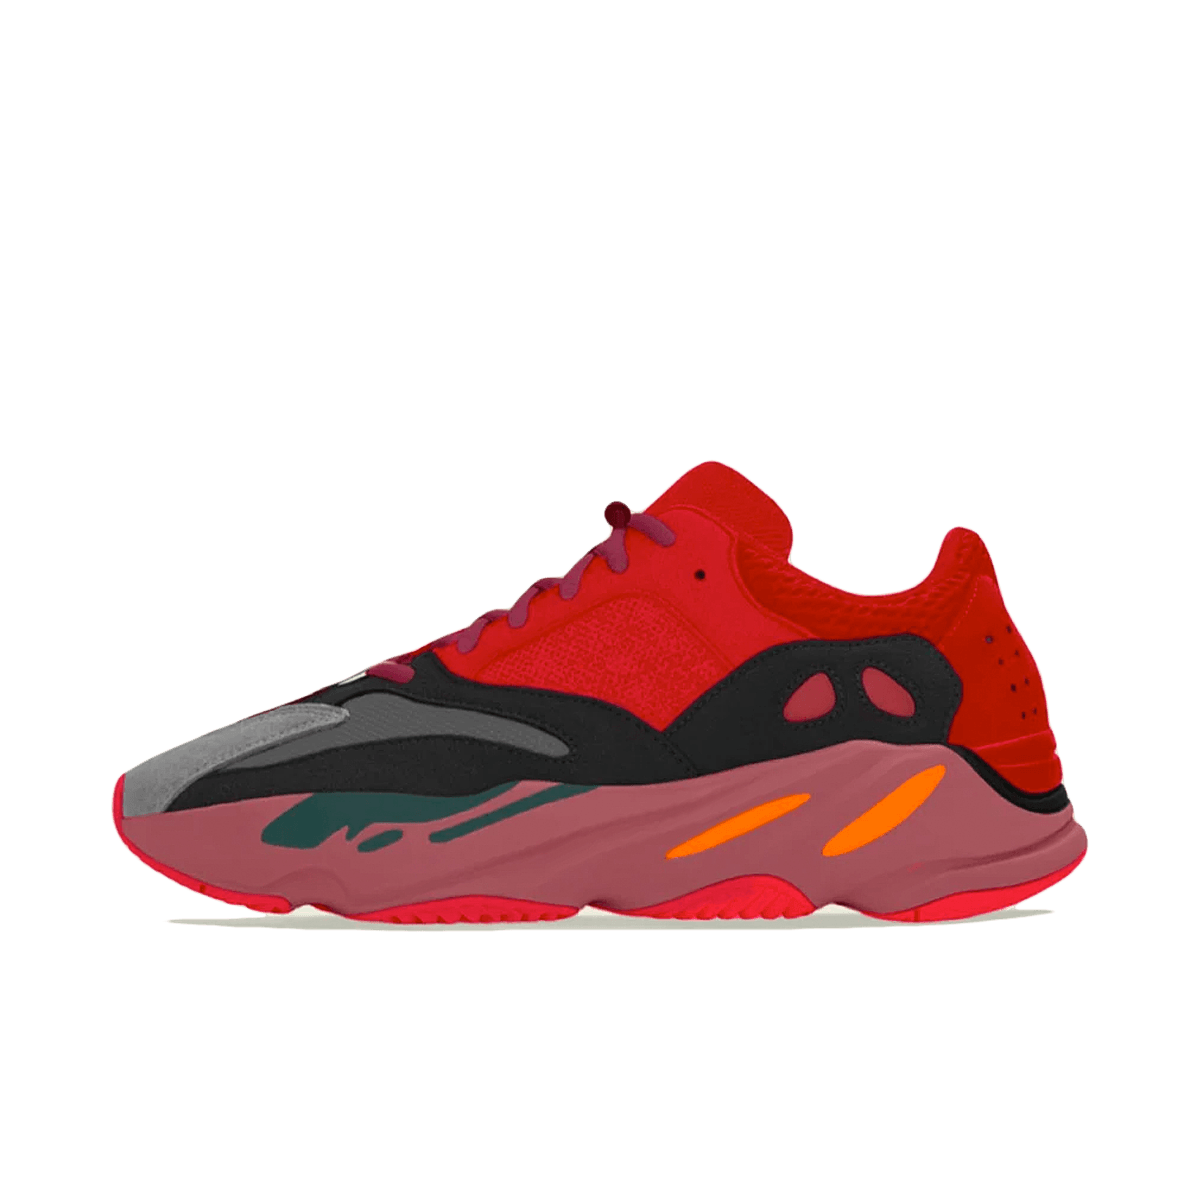 adidas Yeezy Boost 700 'Hi-Res Red' HQ6979